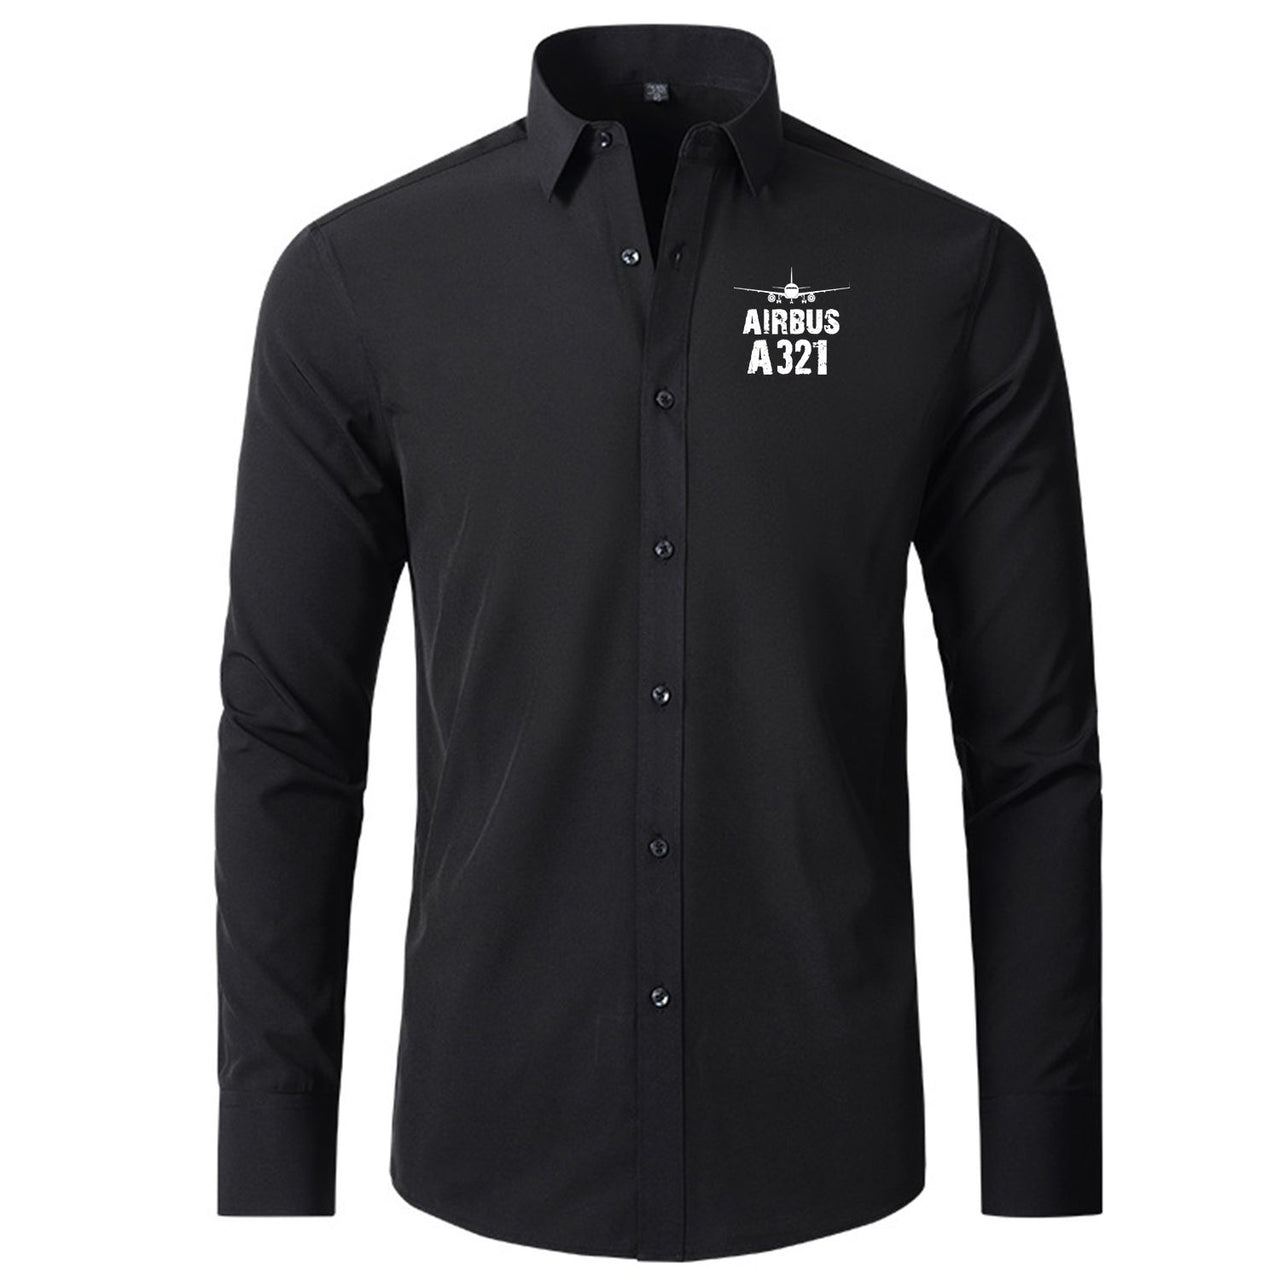 Airbus A321 & Plane Designed Long Sleeve Shirts